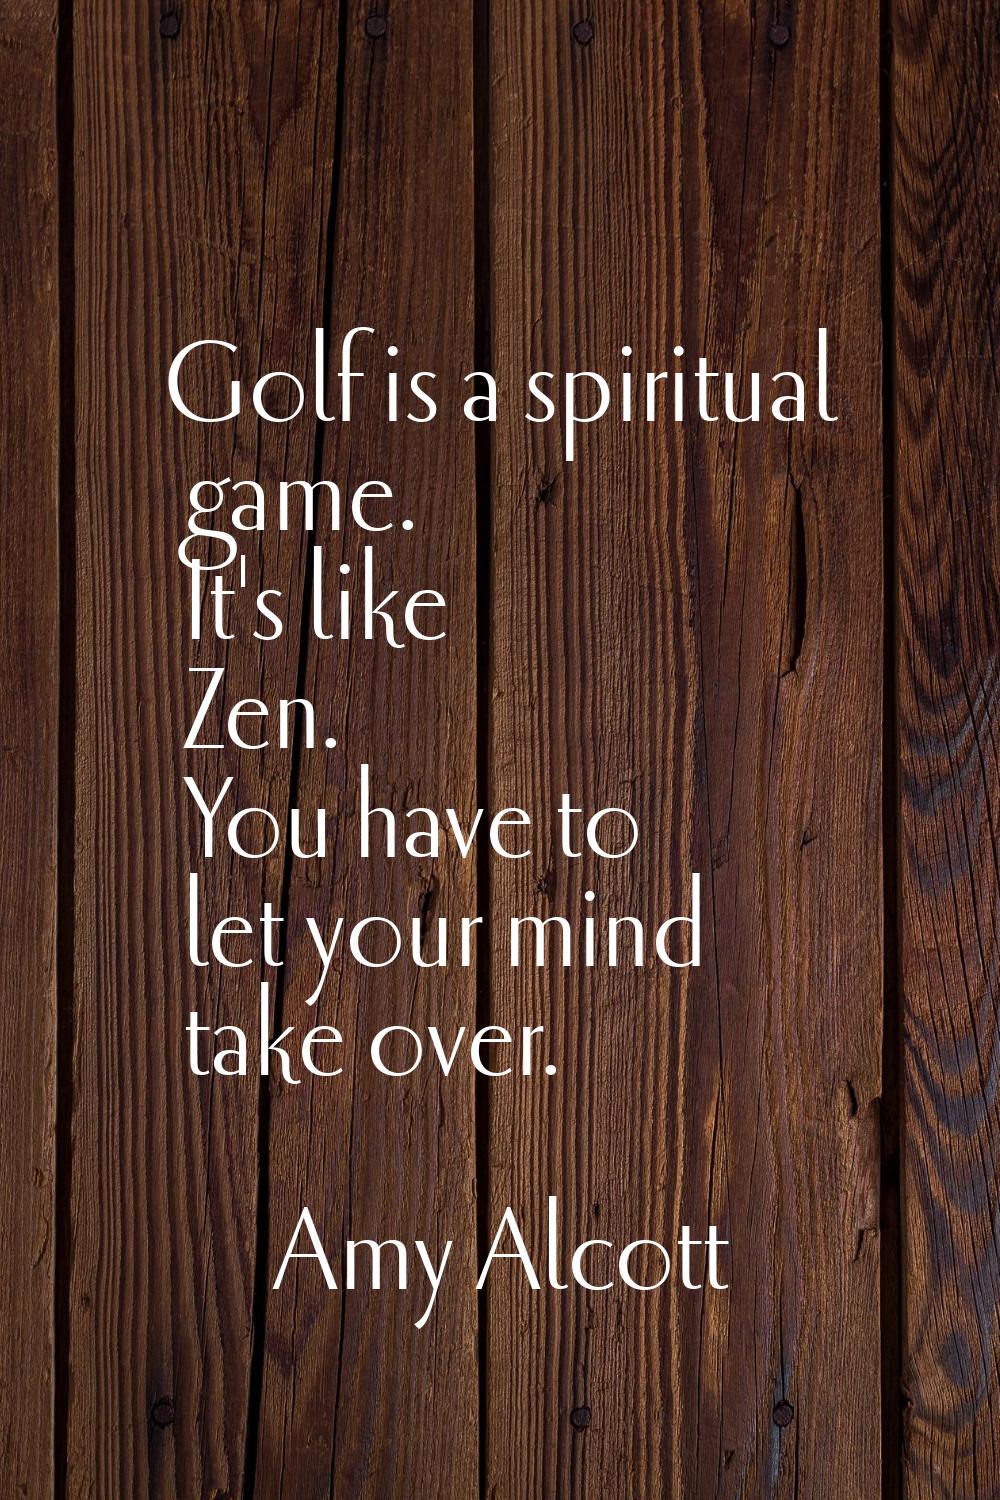 Golf is a spiritual game. It's like Zen. You have to let your mind take over.